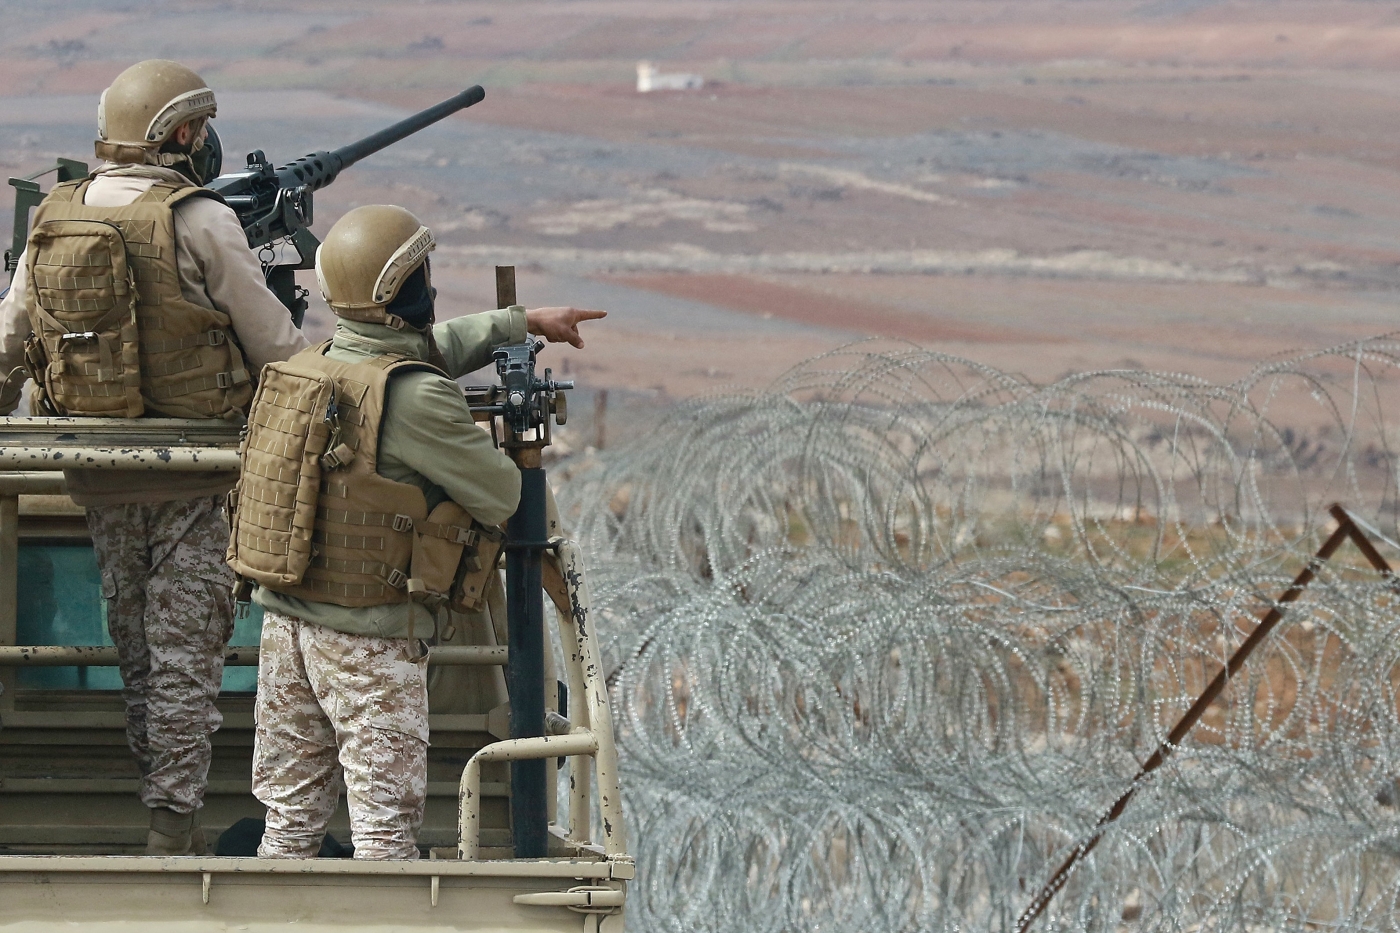 Jordanian soldiers patrol along the border with Syria to prevent trafficking during a tour organised by the Jordanian Army on 17 February 2022. (AFP)